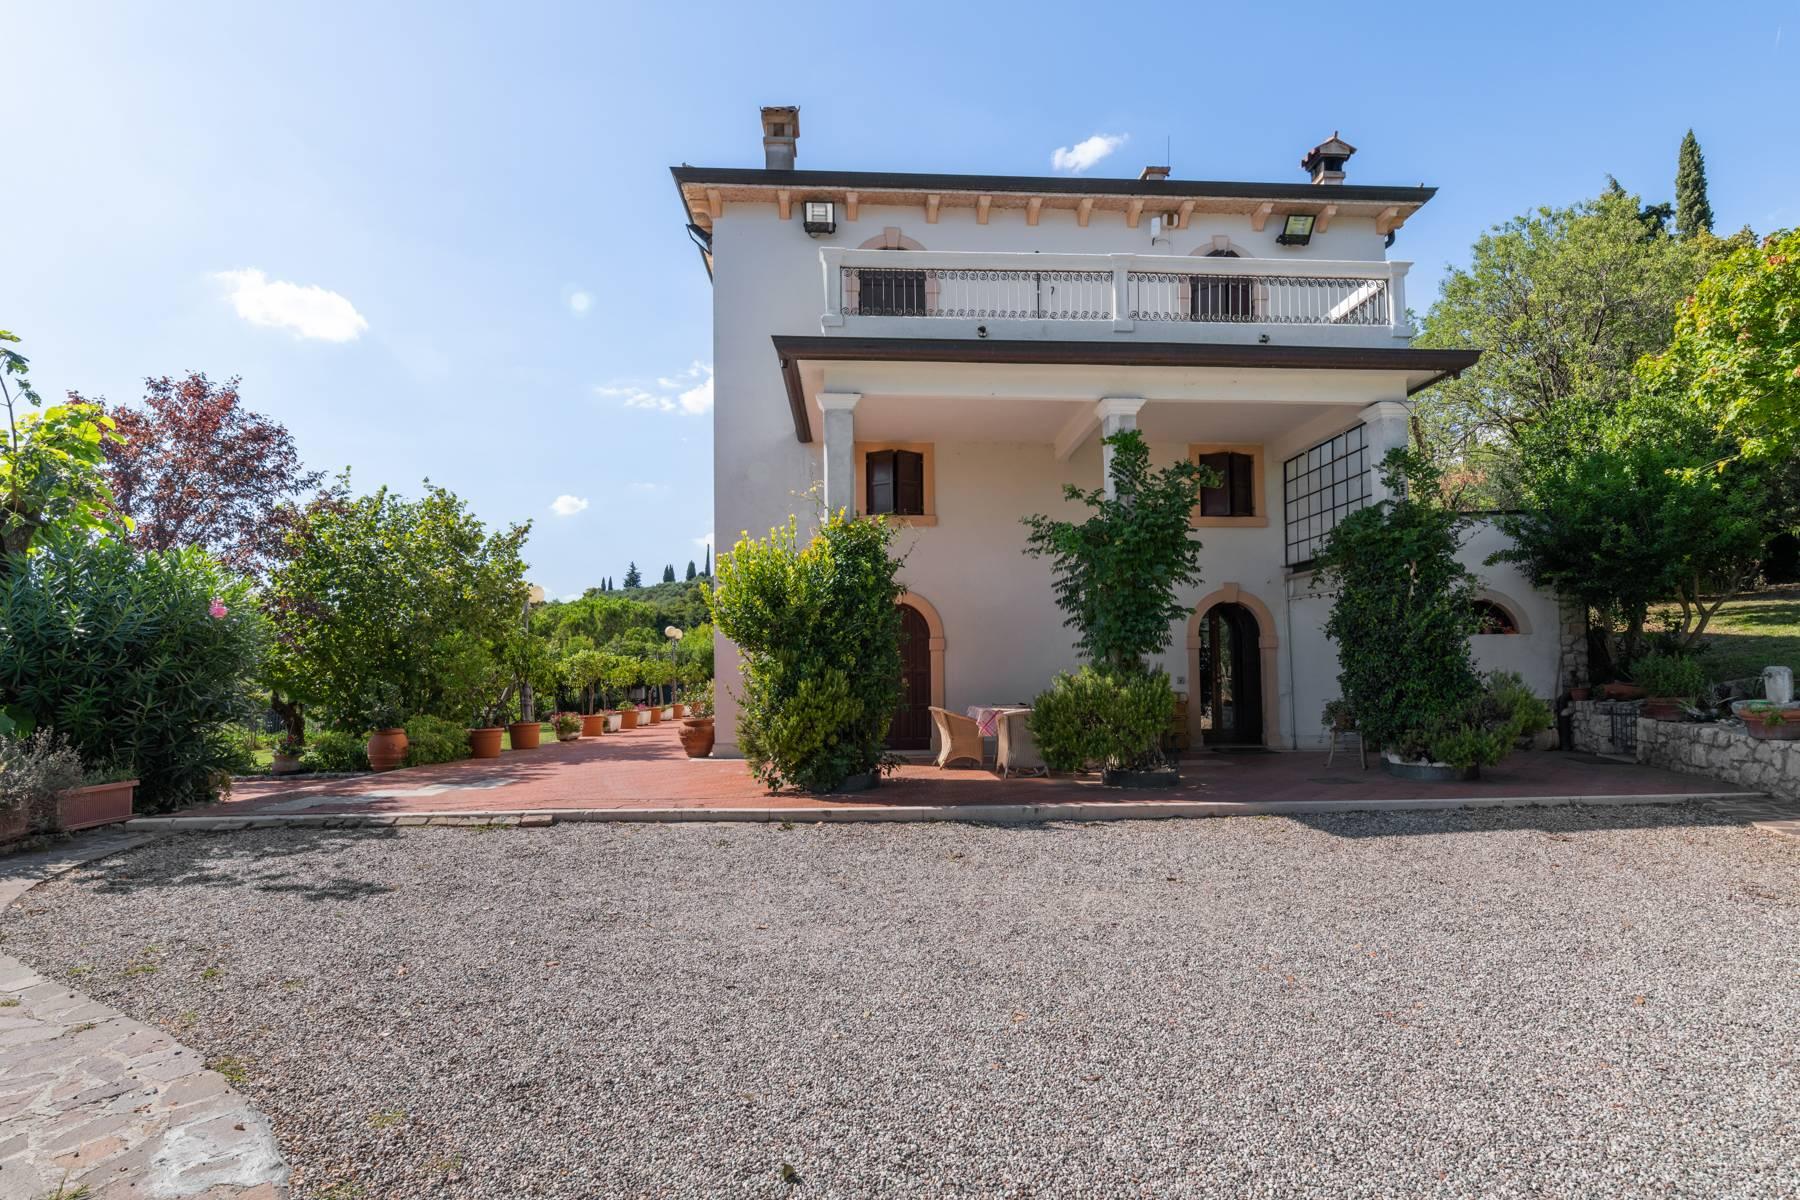 Historic country villa with swimming pool, tennis court and estate on the hills of Verona - 6